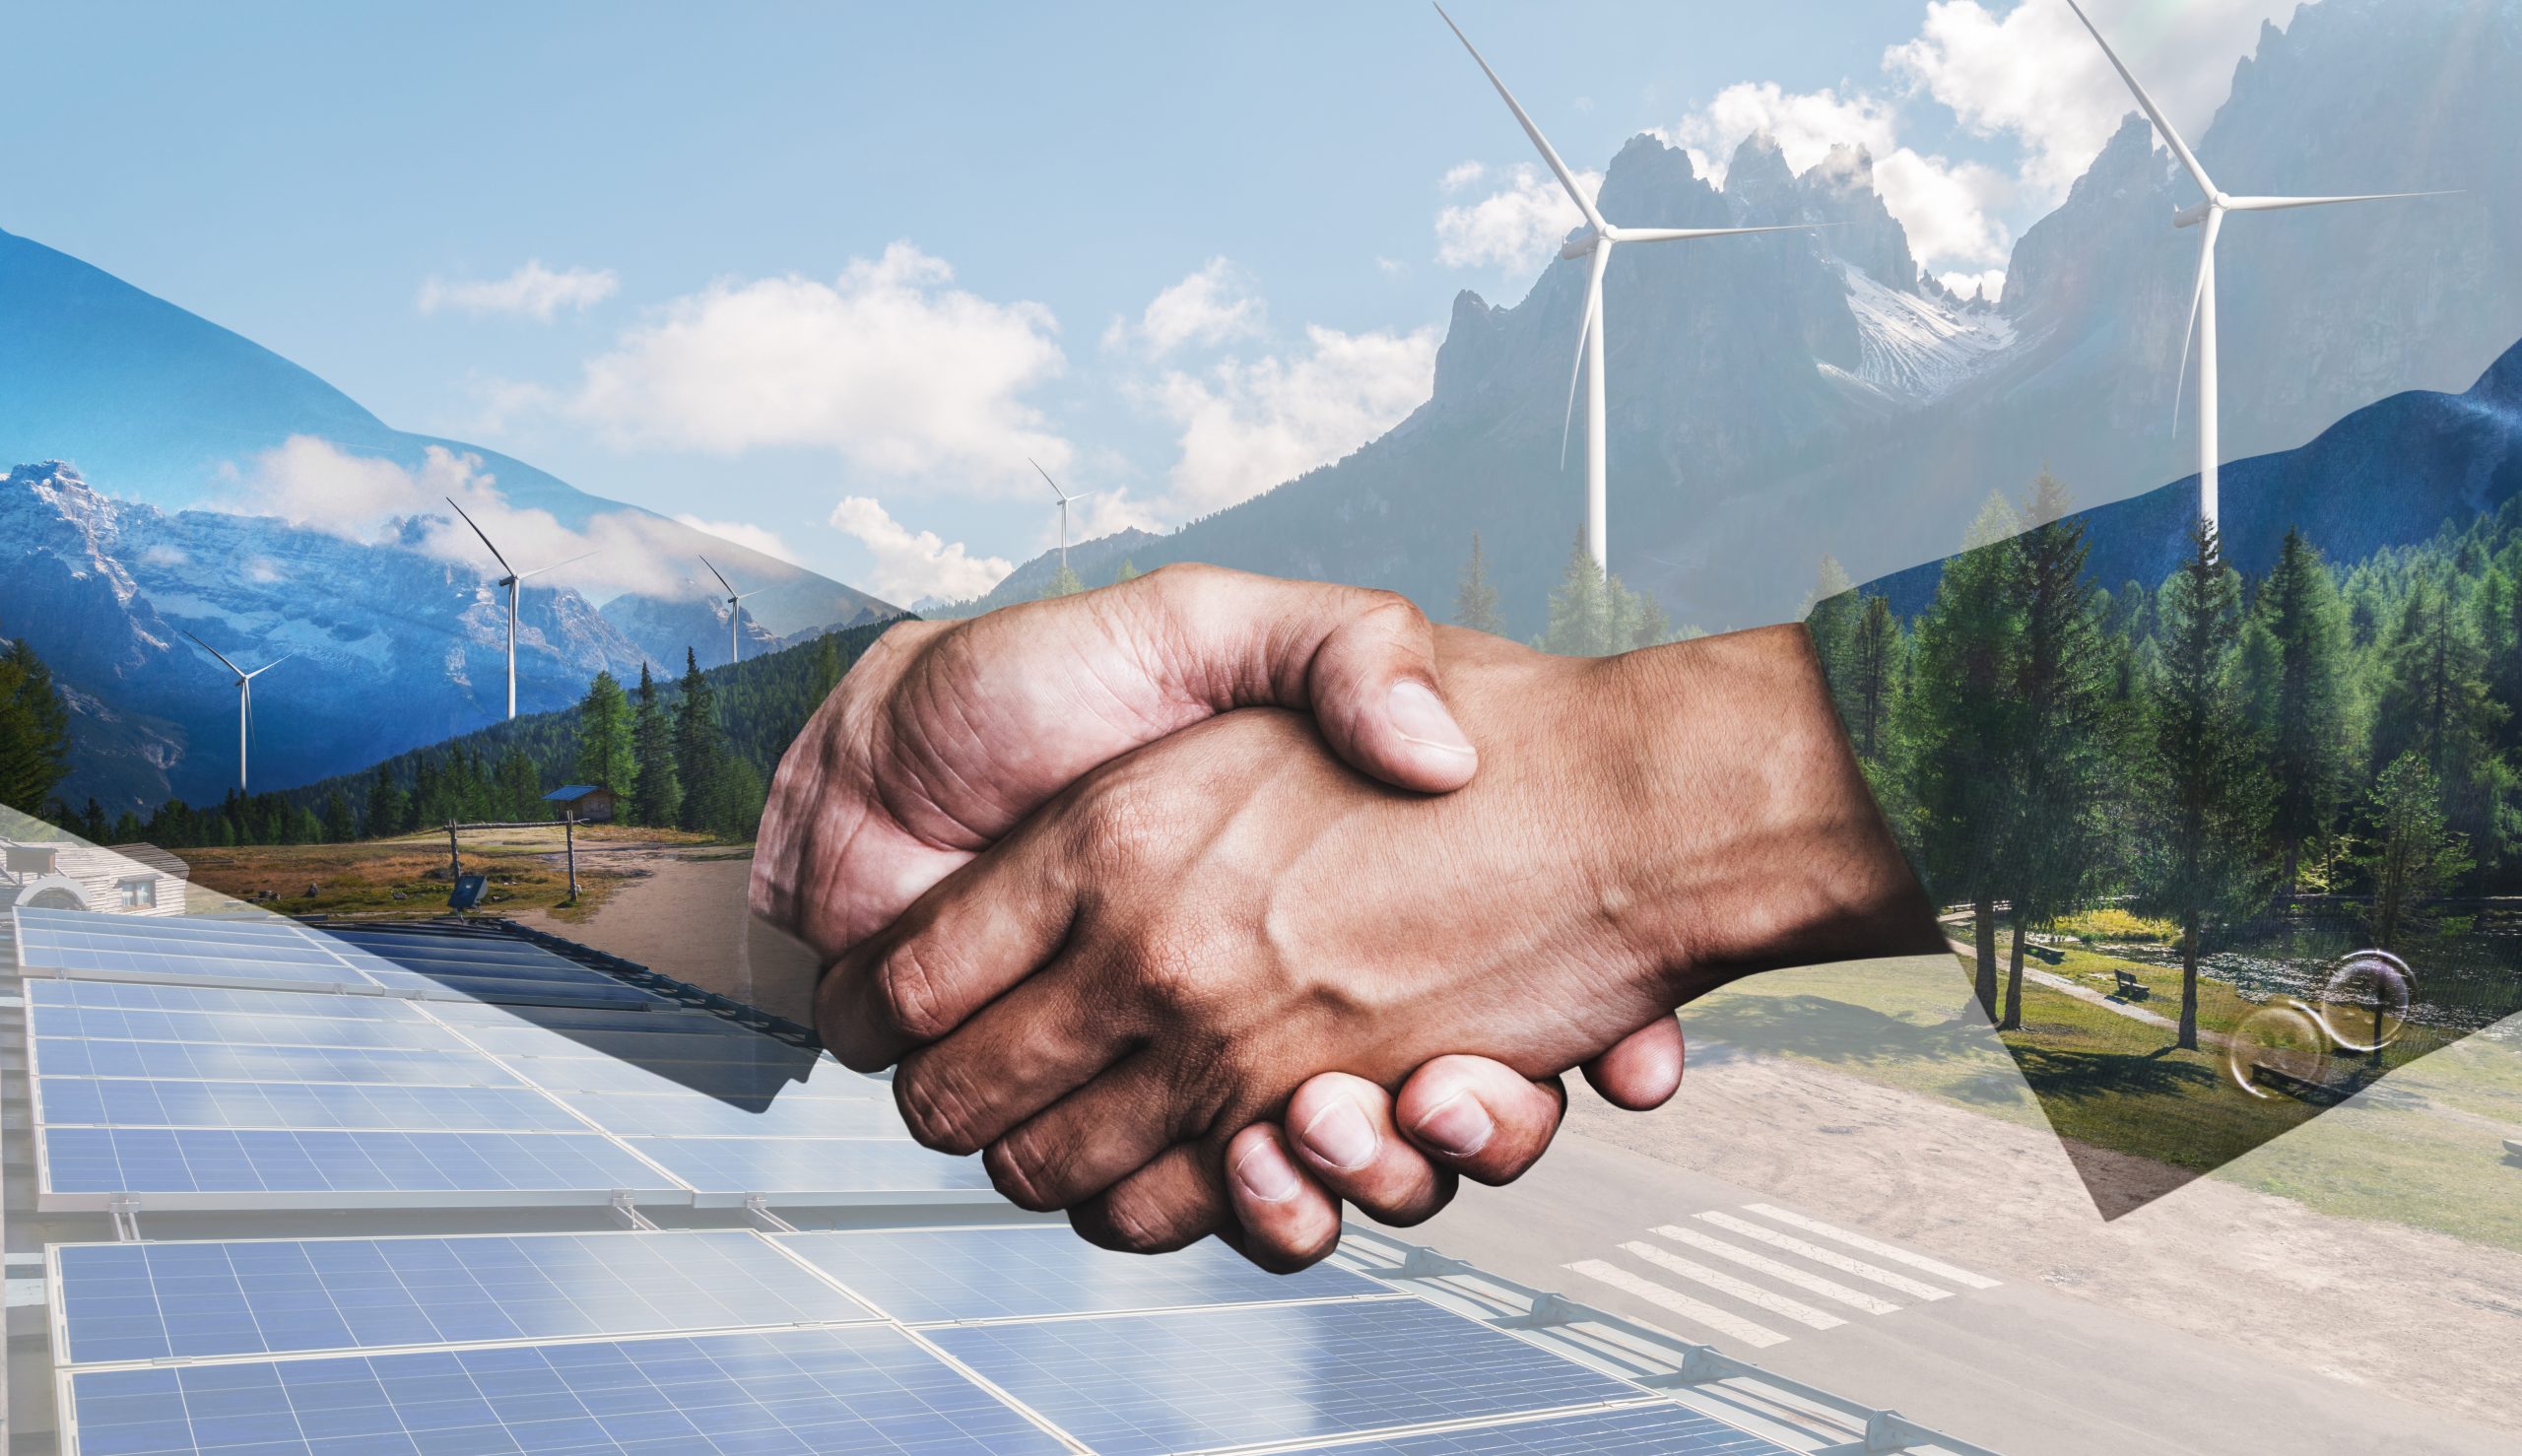 Double exposure graphic of business people handshake over wind turbine farm and green renewable energy worker interface